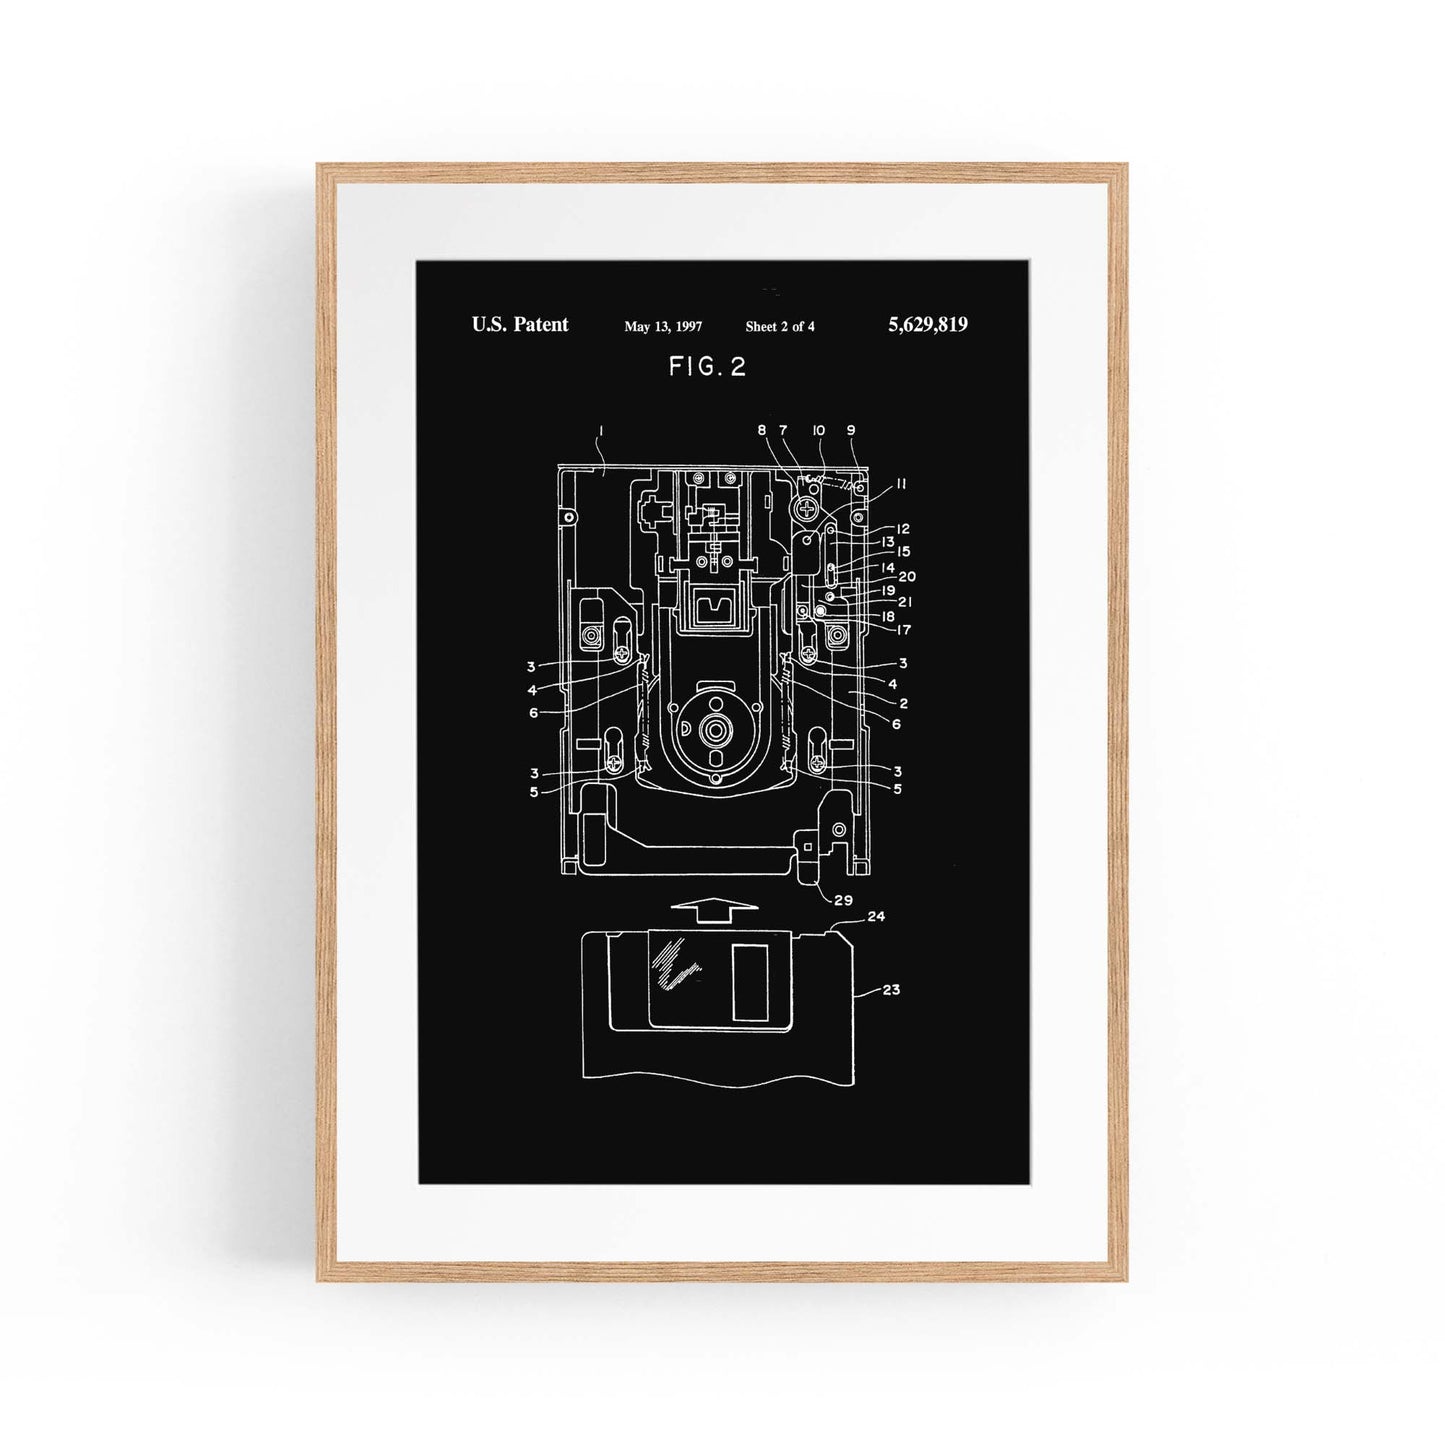 Vintage Floppy Disk Patent Wall Art #1 - The Affordable Art Company